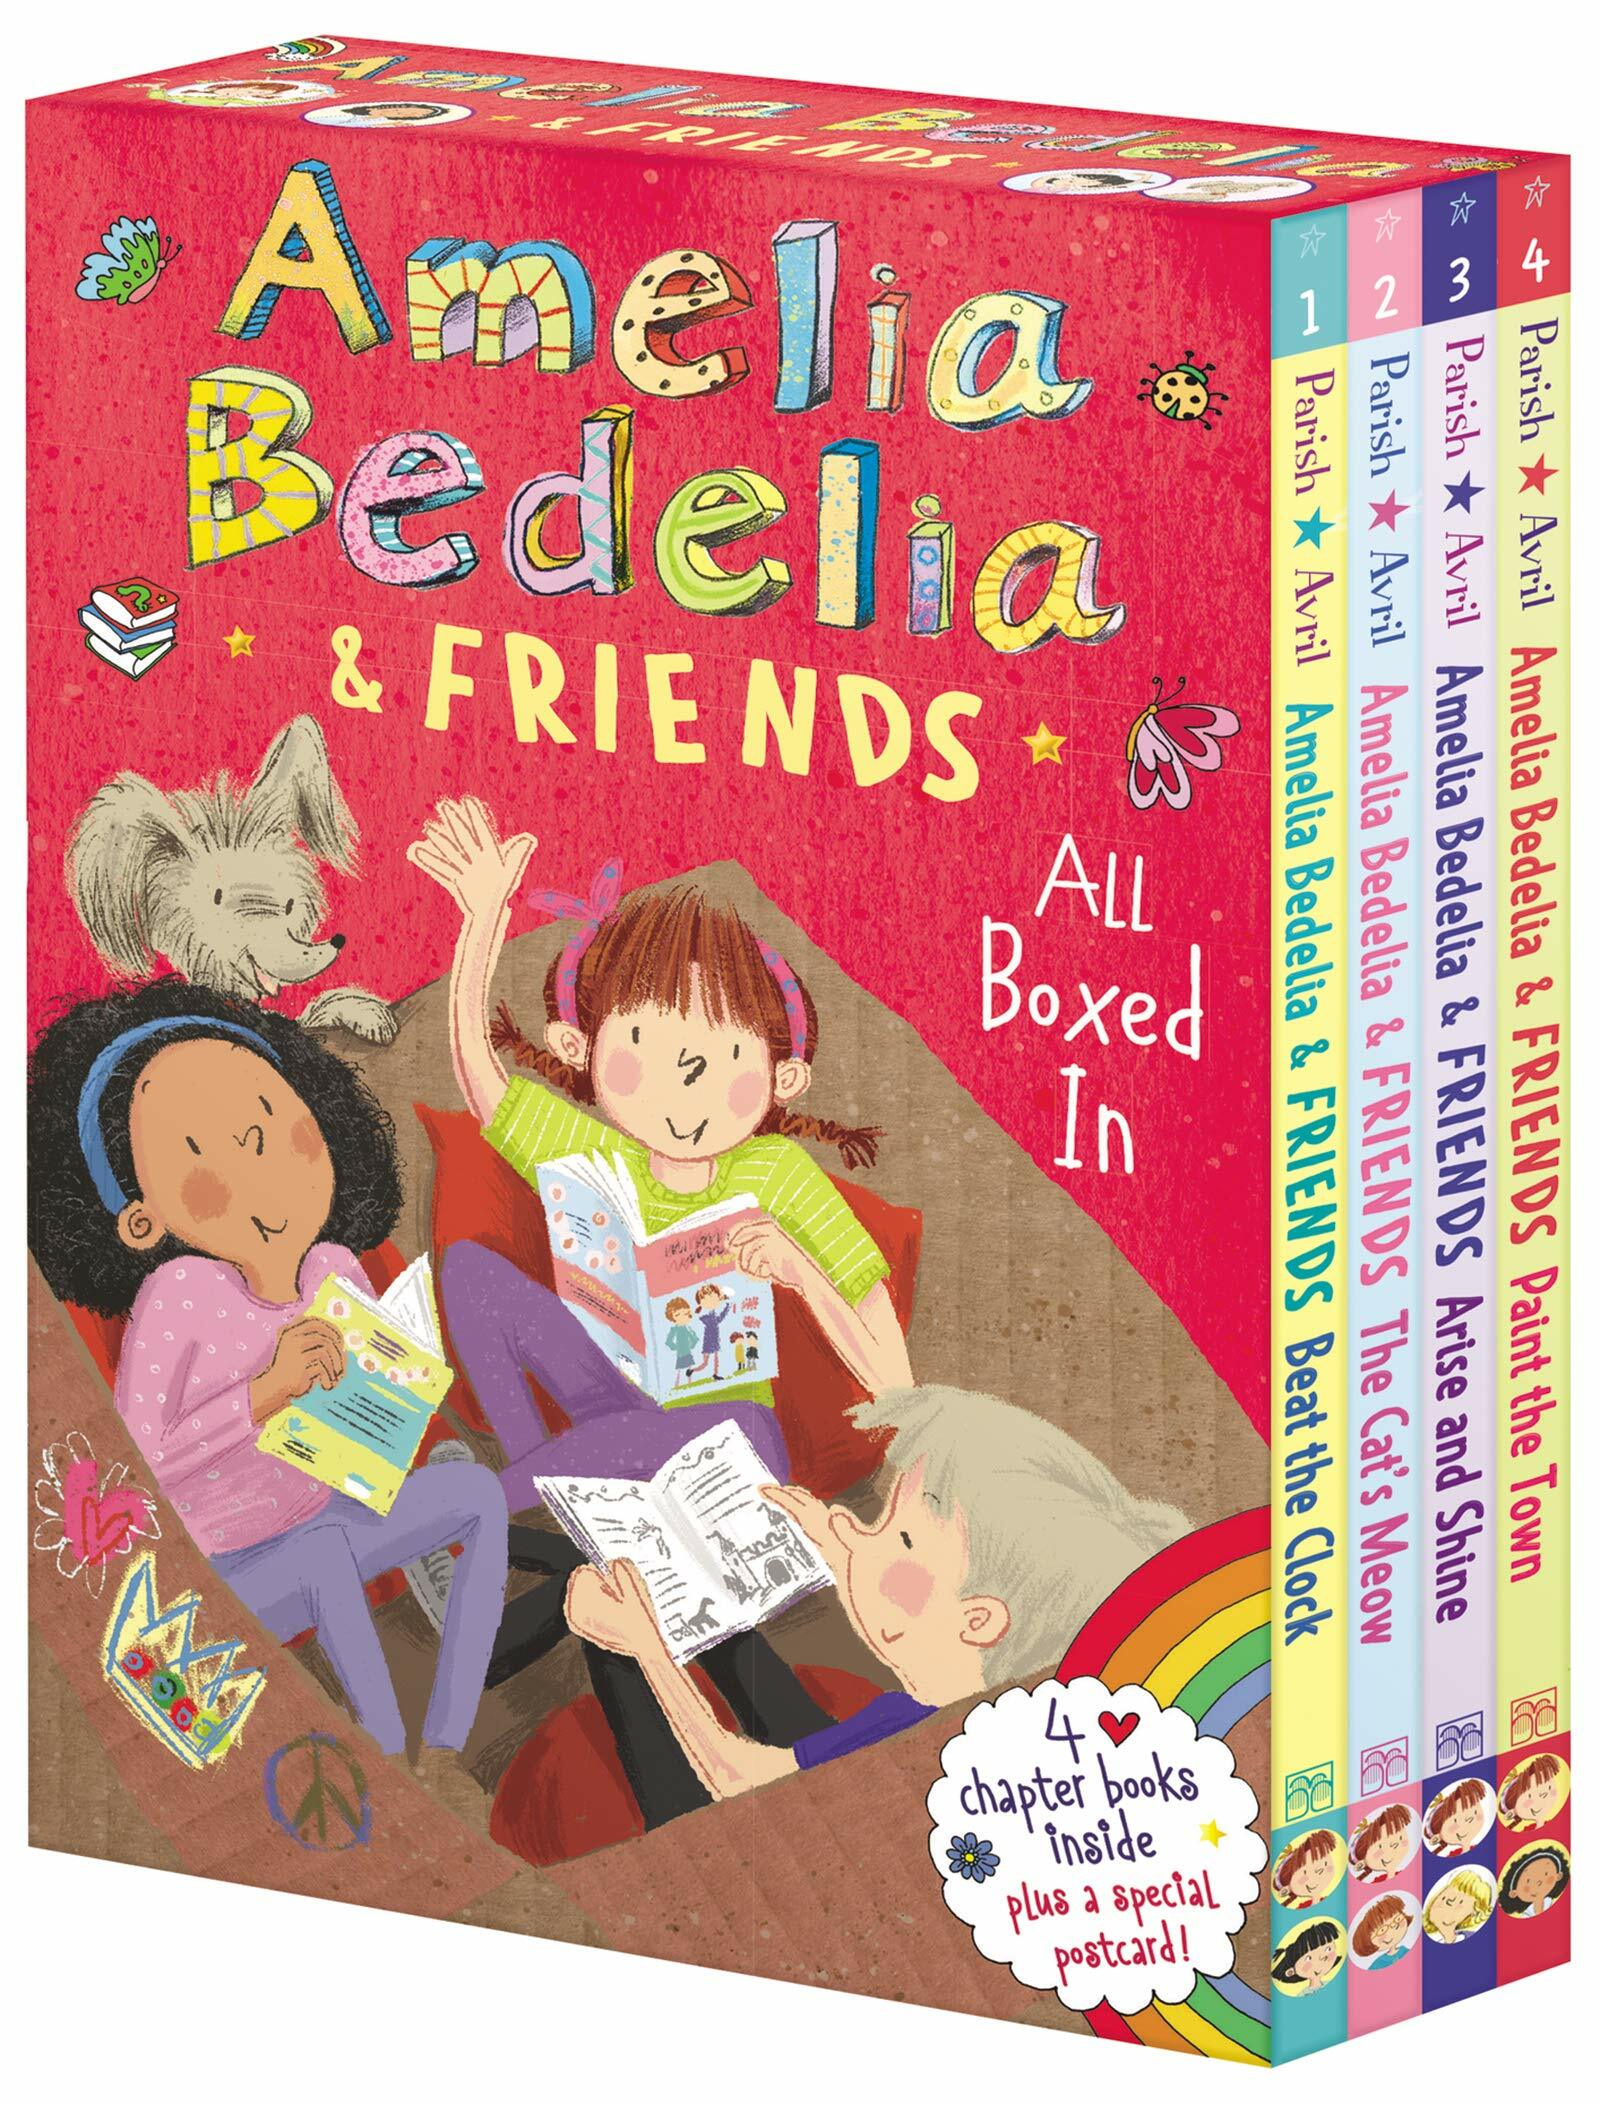 Amelia Bedelia & Friends Chapter Book Boxed Set #1: All Boxed in (Paperback)